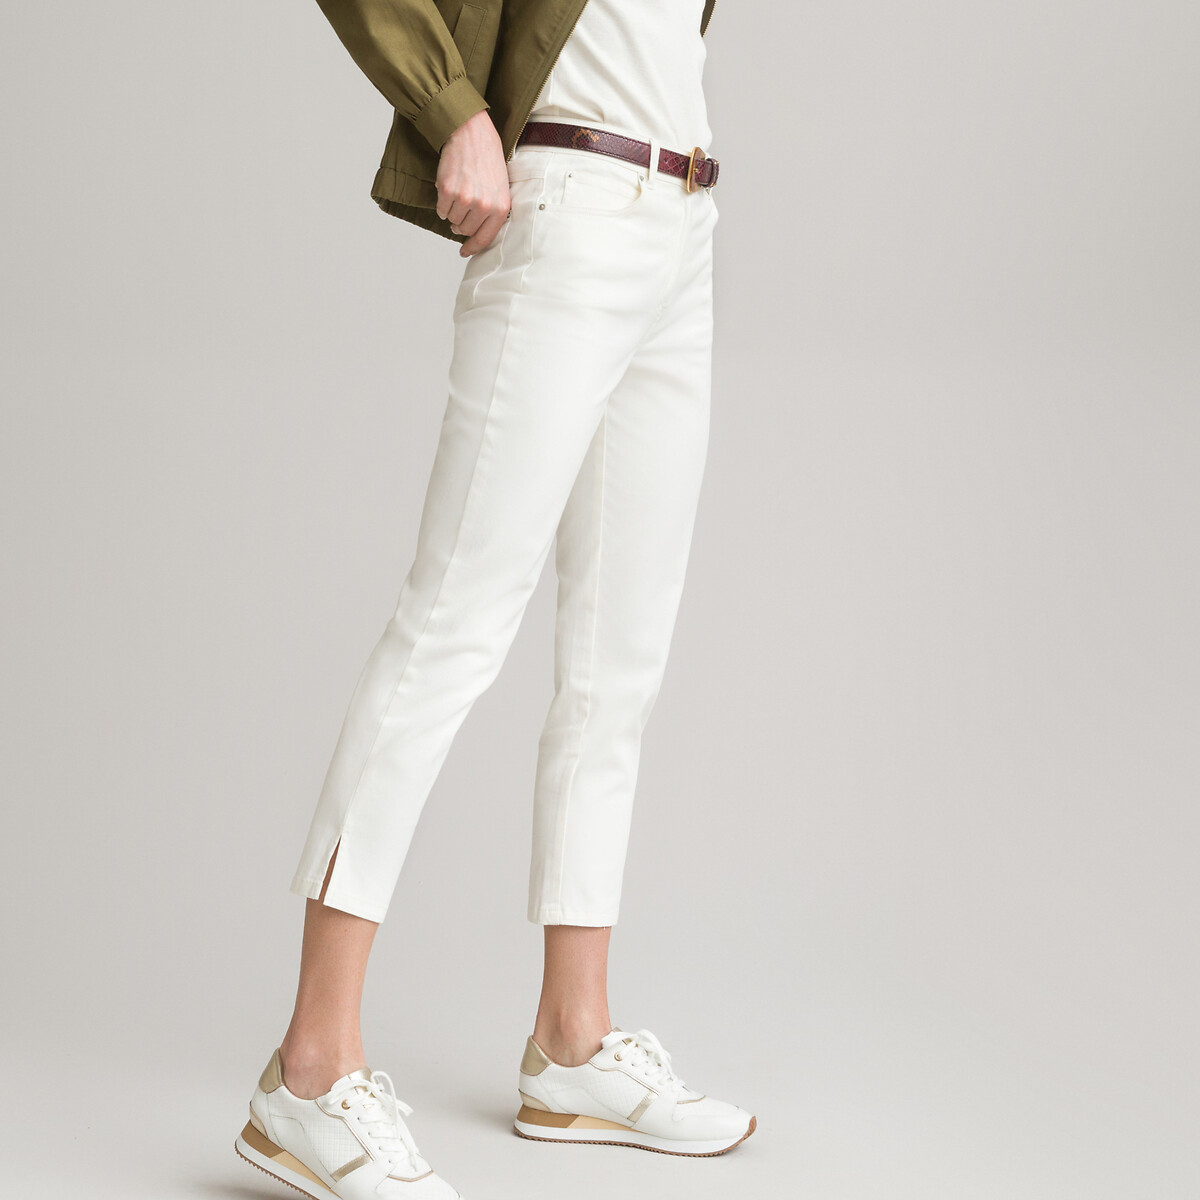 Image of Cotton Twill Cropped Trousers, Length 22.5"